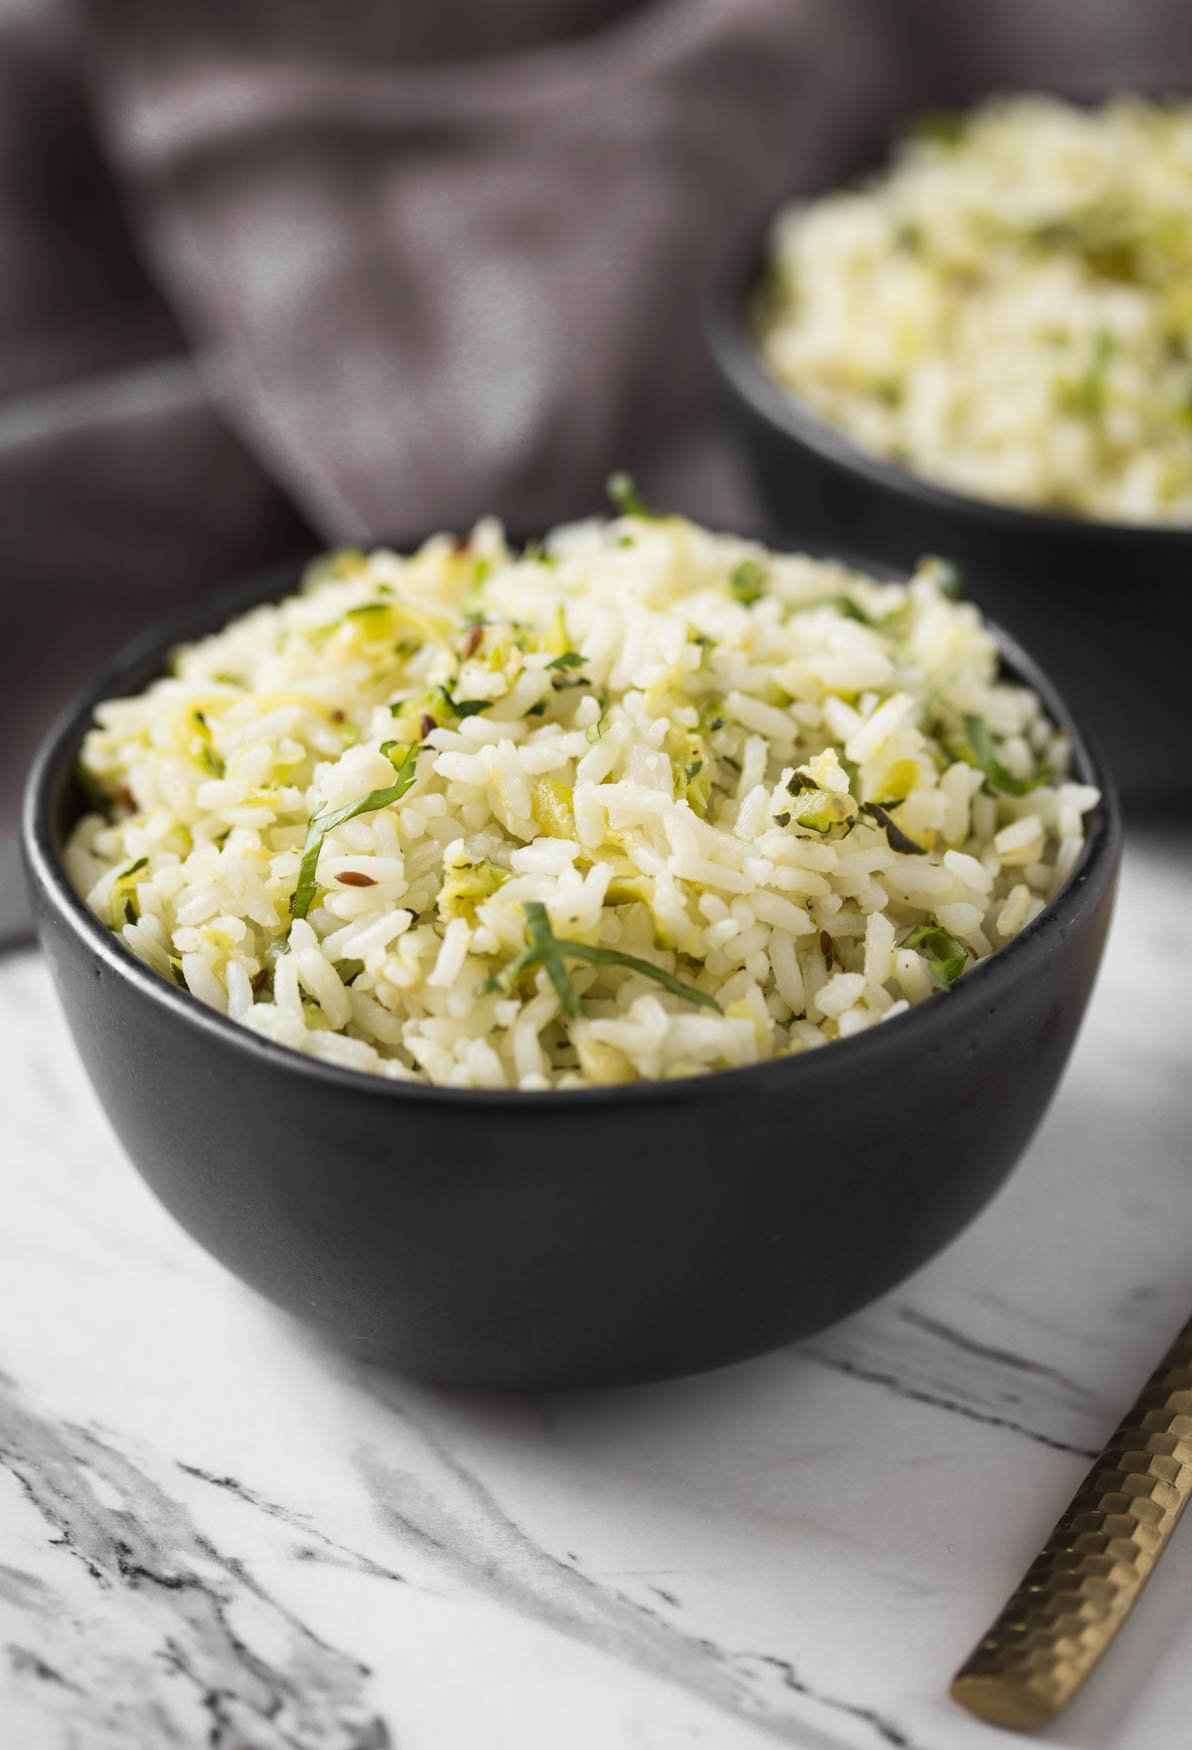 Loaded with fresh zucchini and garlic flavors this healthy zucchini rice is ready in 30 mins. Perfect quick and easy vegetarian (and vegan) recipe to include in a weeknight dinner or lunch menu. | #watchwhatueat #zucchini #zucchinirecipes #ricepilaf #zucchinirice